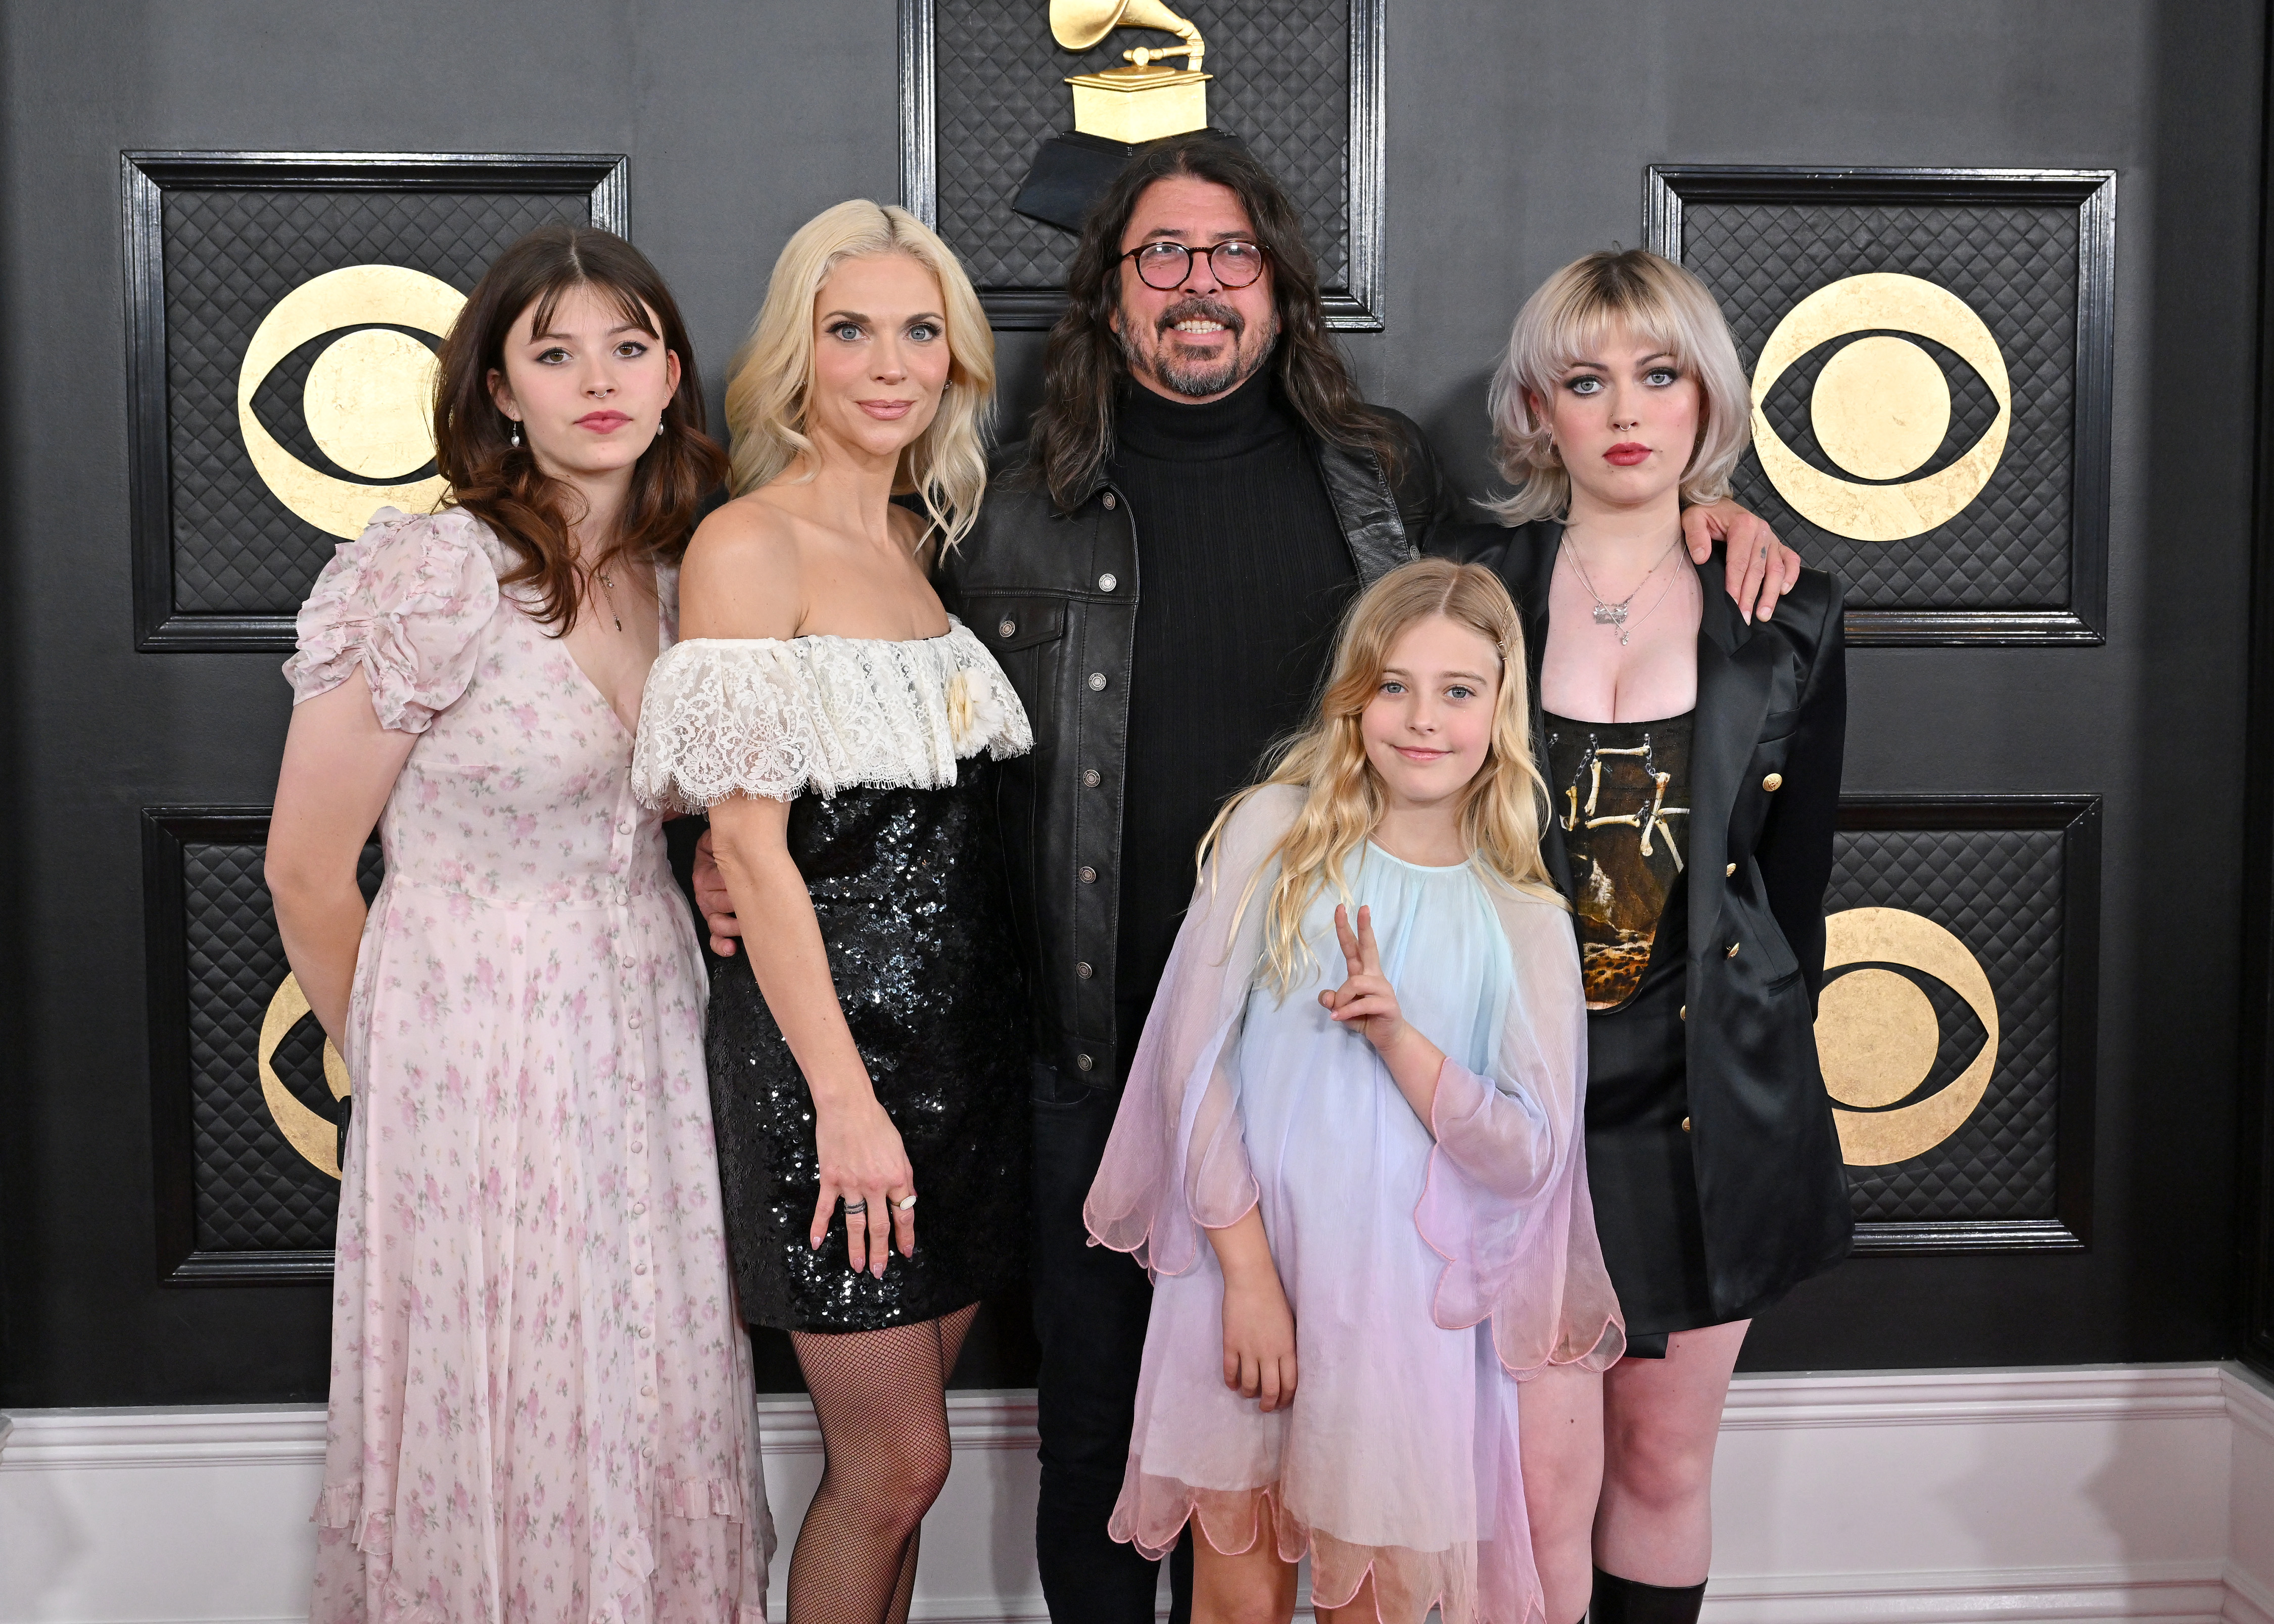 Harper Grohl, Jordyn Blum, Dave Grohl, Ophelia Grohl, and Violet Grohl at the 65th GRAMMY Awards on February 5, 2023, in Los Angeles, California. | Source: Getty Images